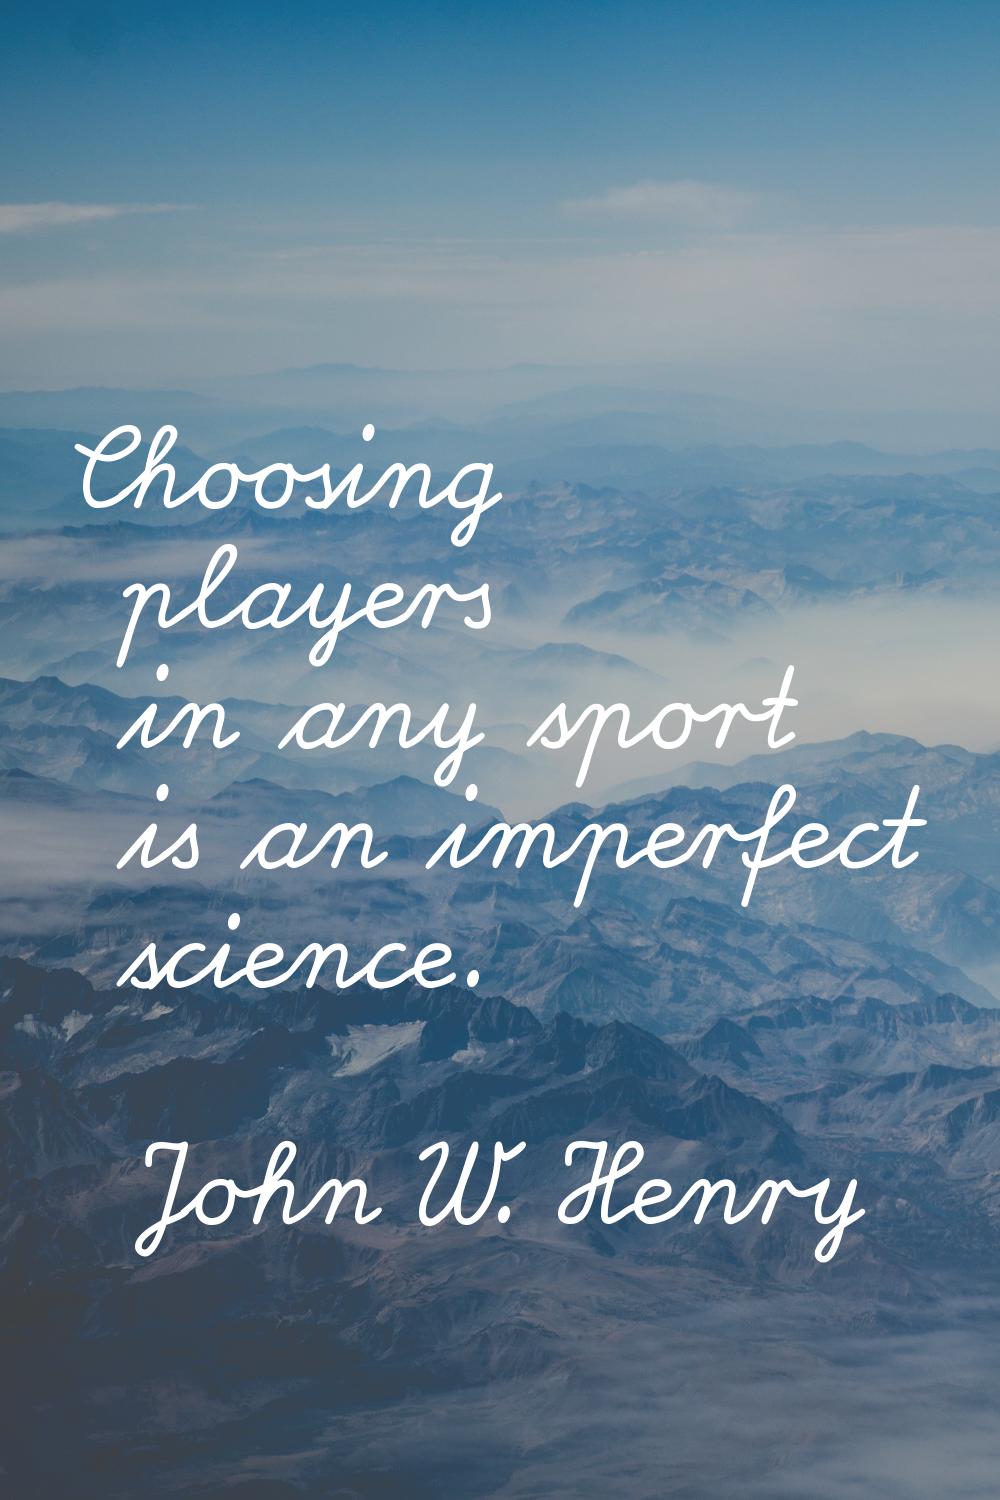 Choosing players in any sport is an imperfect science.